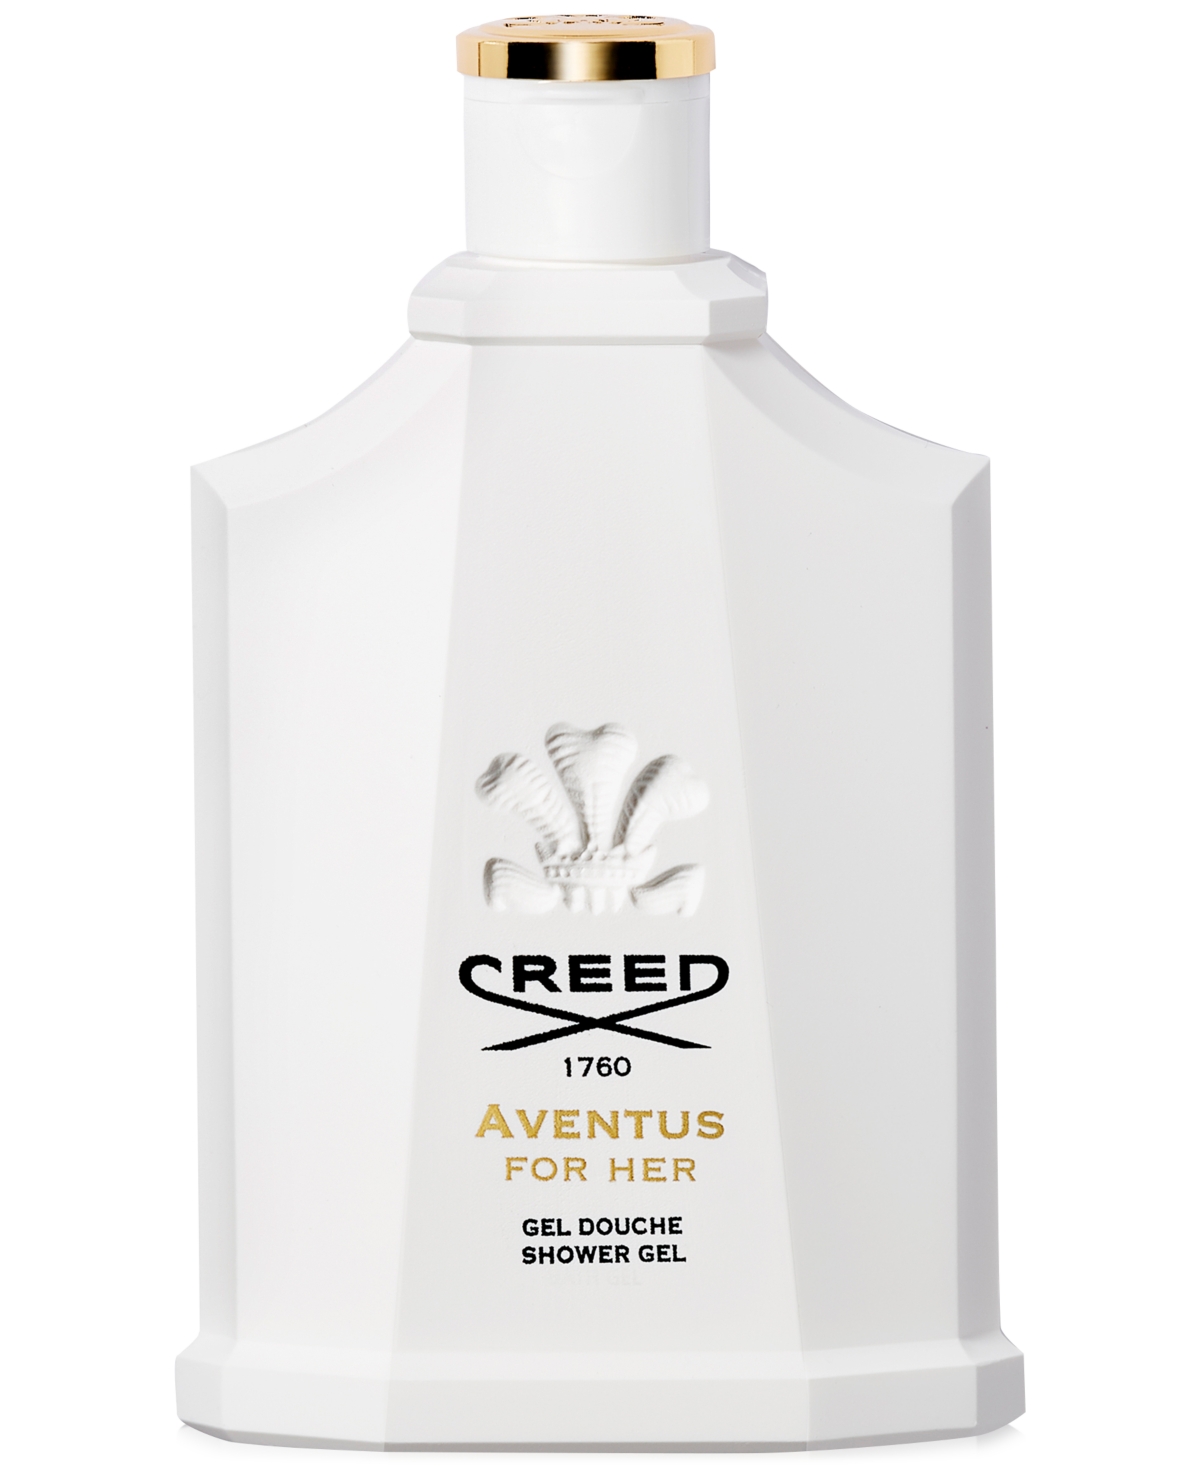 Creed Aventus For Her Shower Gel, 6.66 Oz.